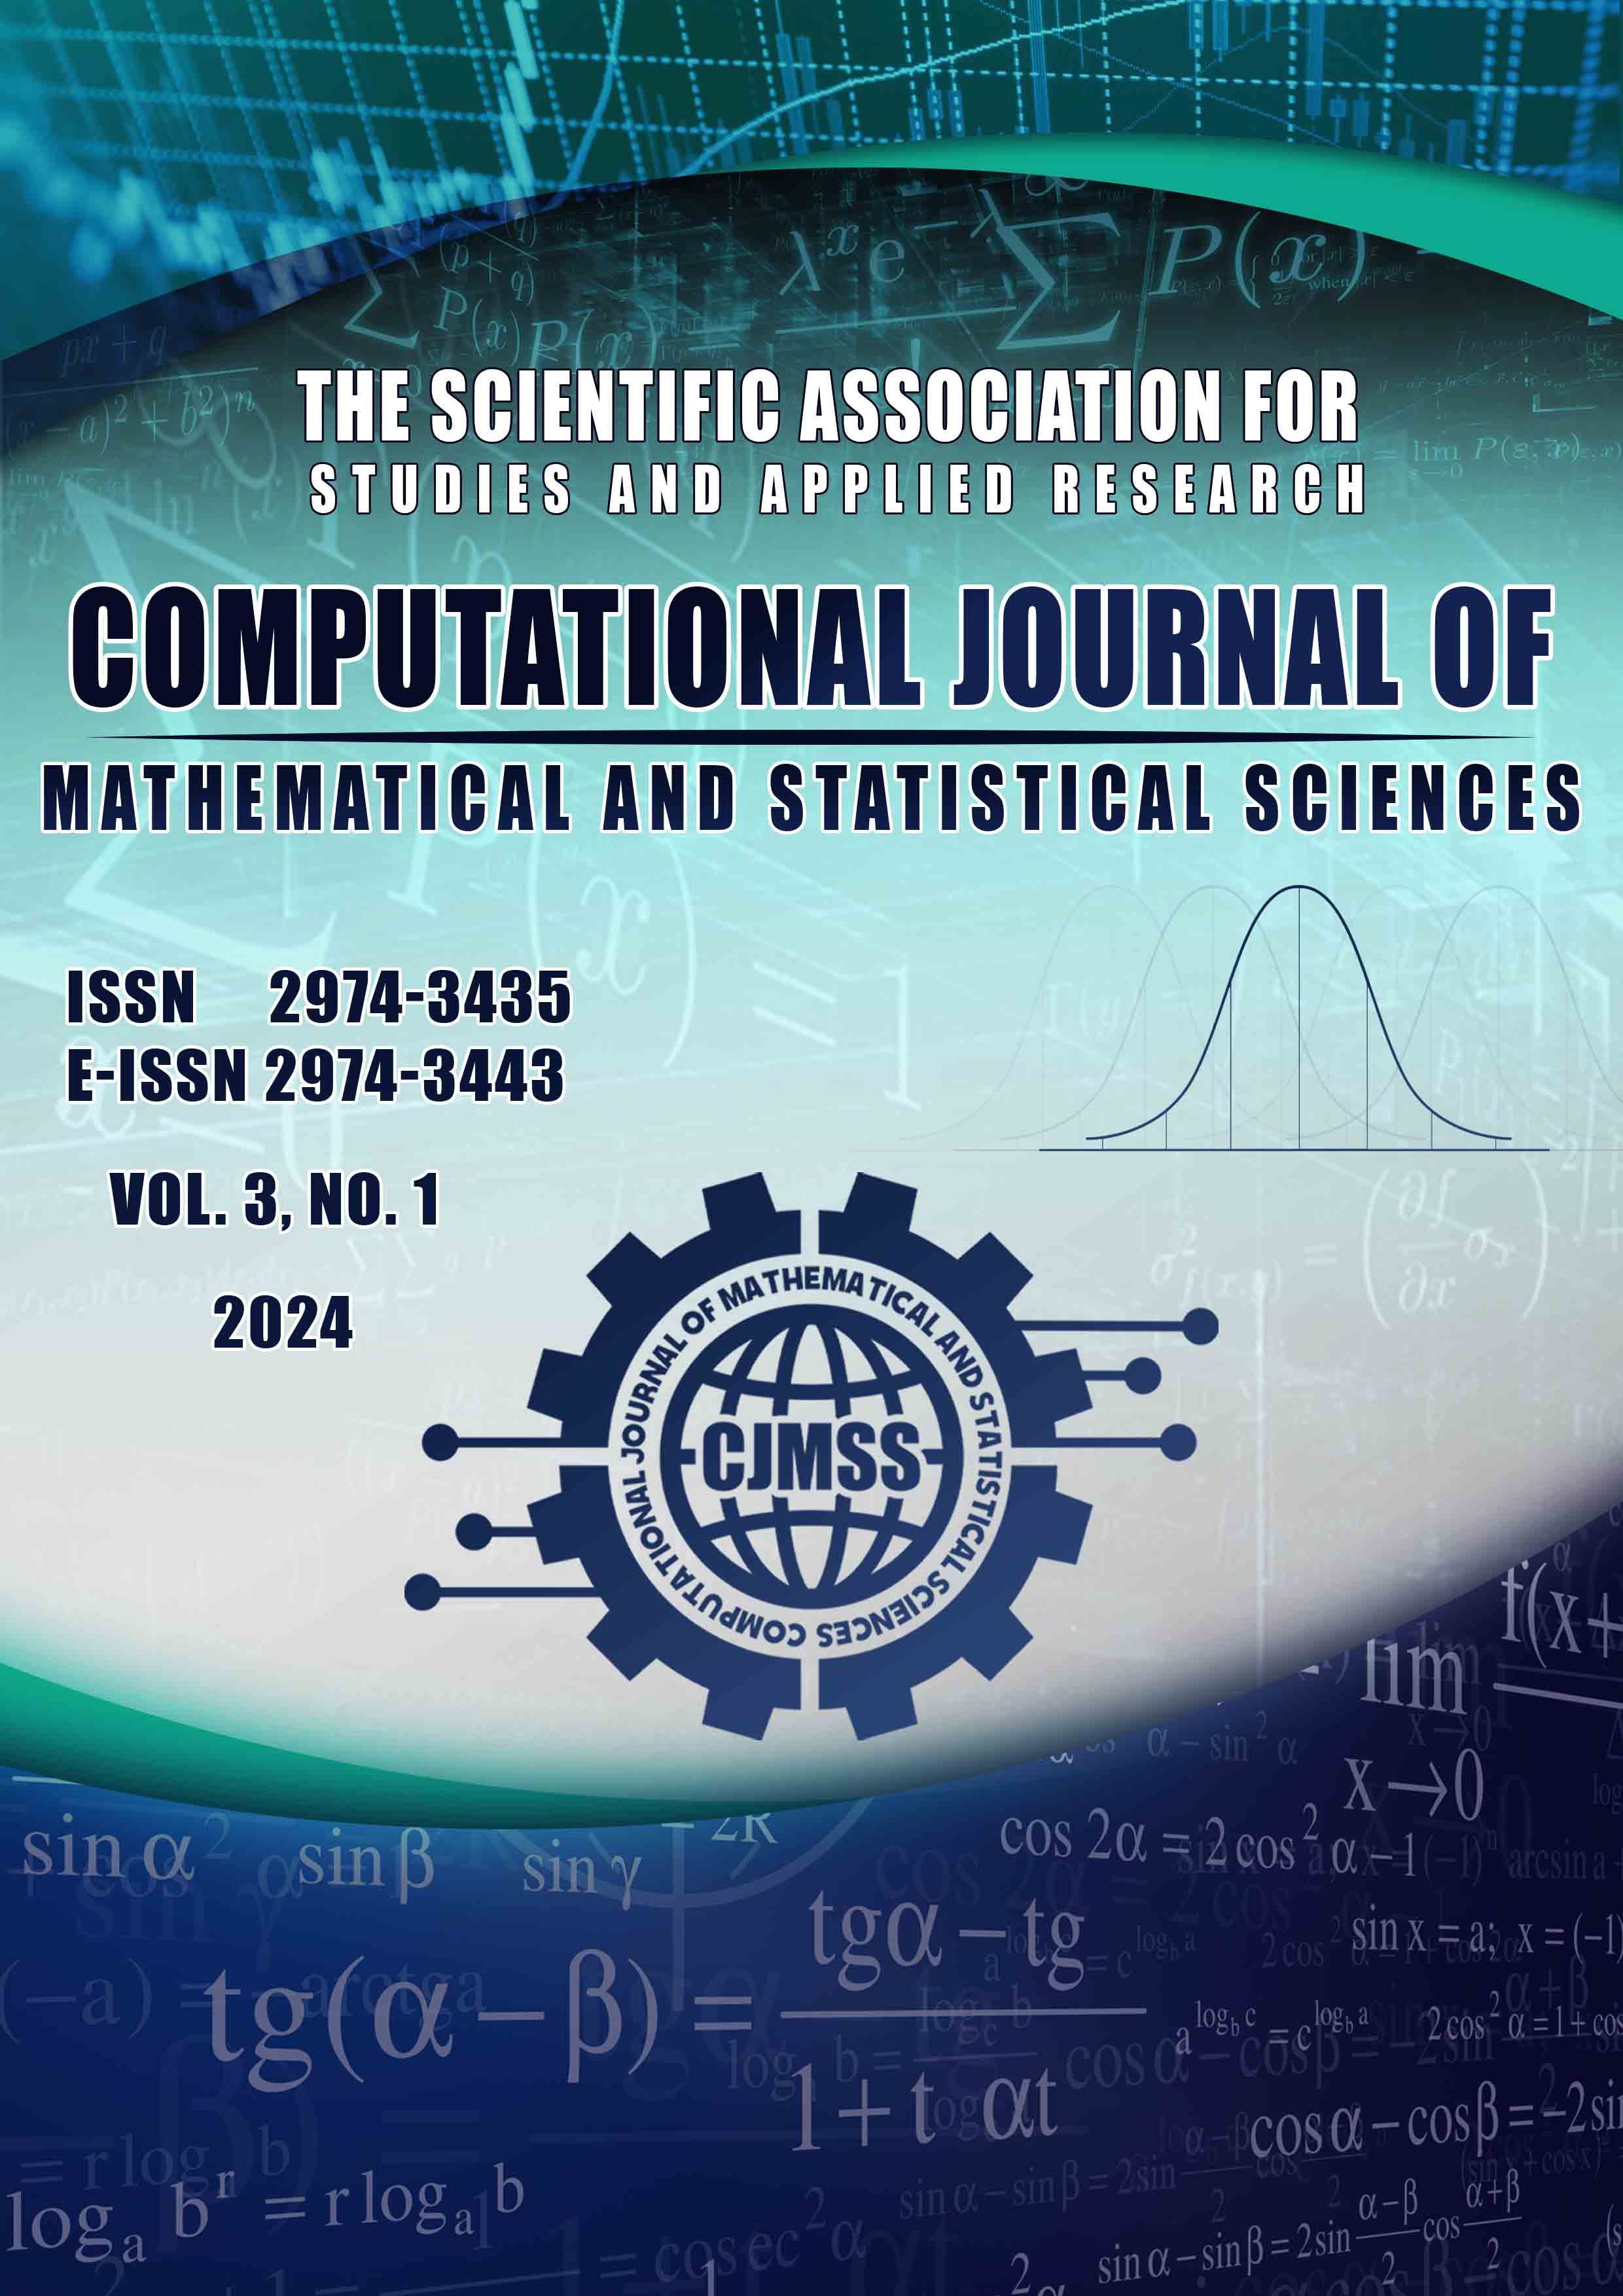 Computational Journal of Mathematical and Statistical Sciences